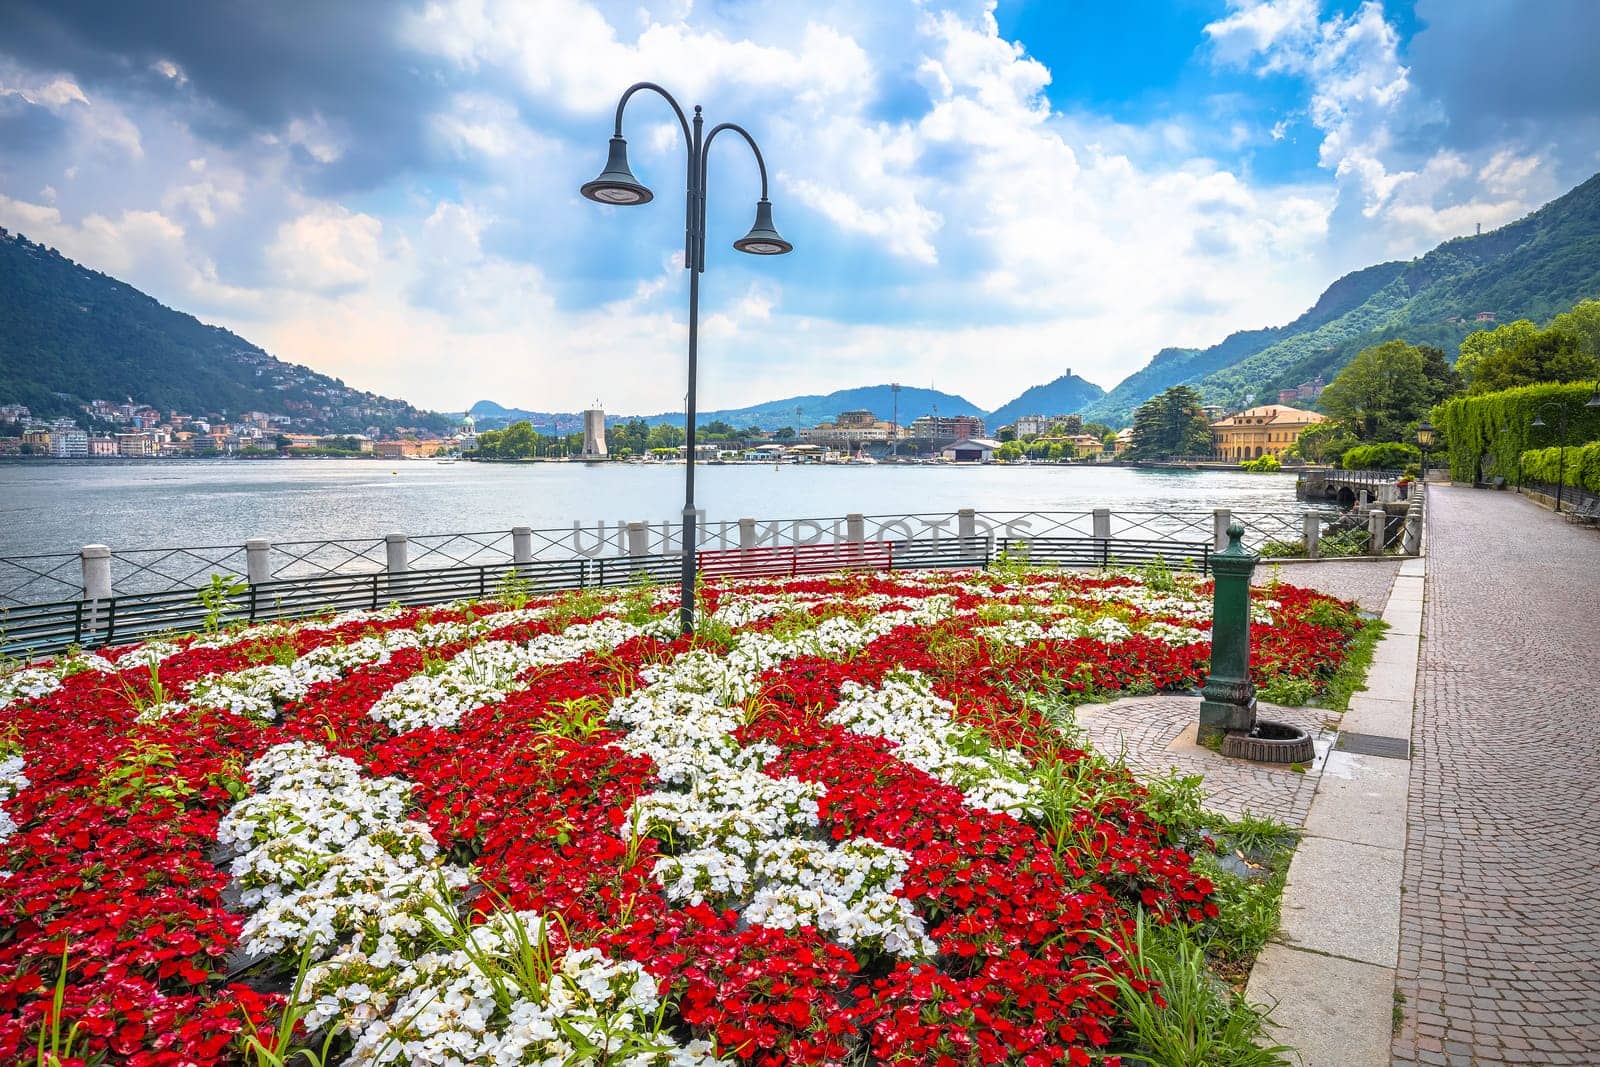 Town of Como lakefront view, Como lake waterfront, Lombardy region of Italy